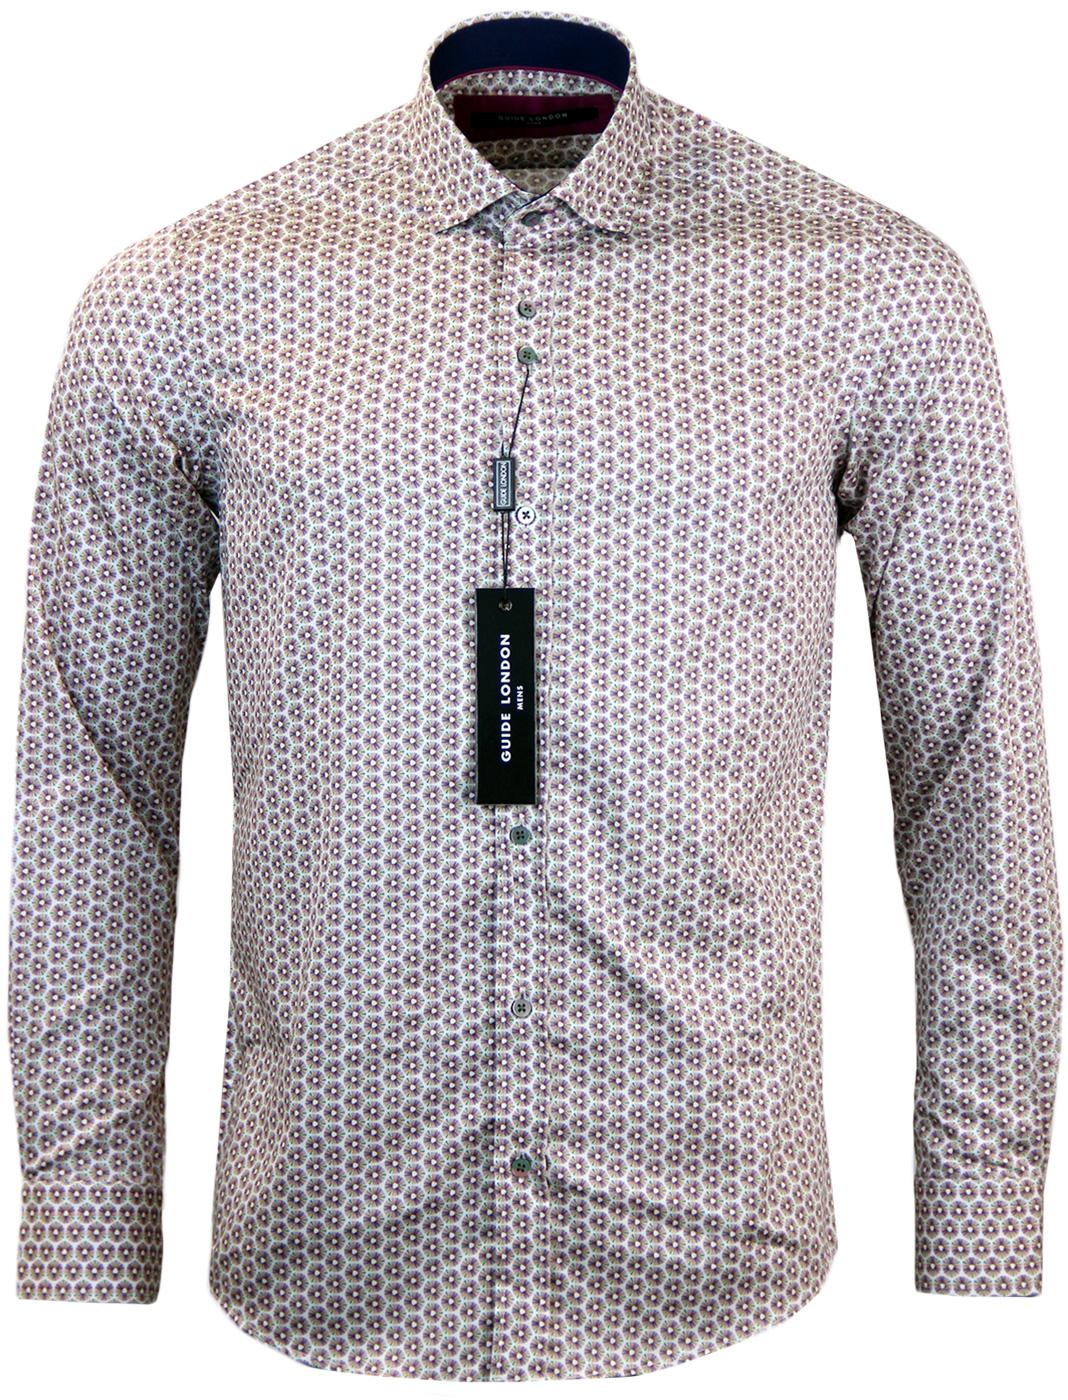 GUIDE LONDON Retro 60s Psychedelic Circle Shirt